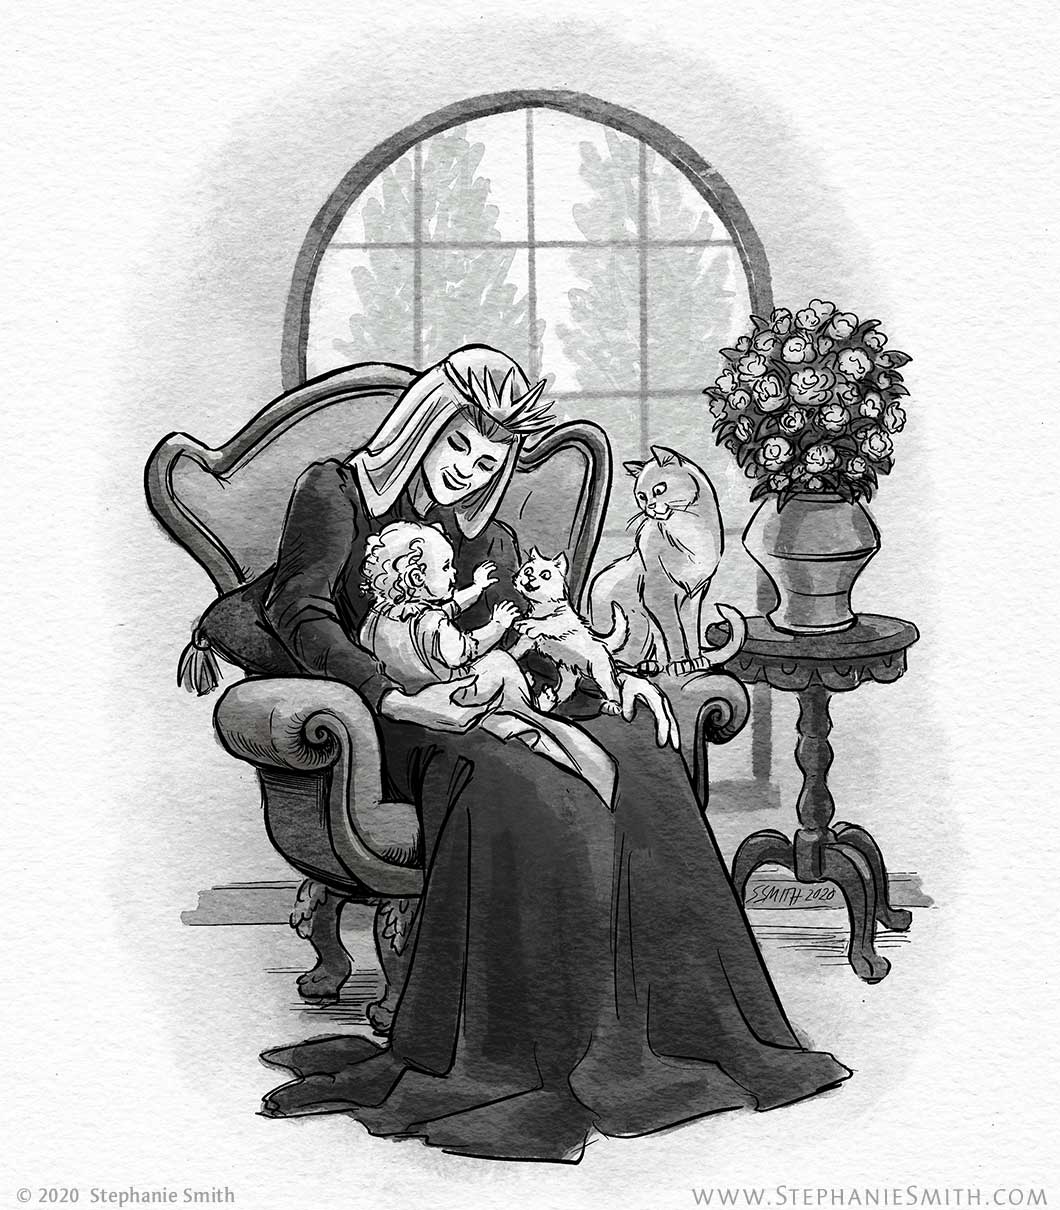 A drawing of smiling woman in a crown sittting with a baby and a kitten playing on her lap, while another cat looks on.